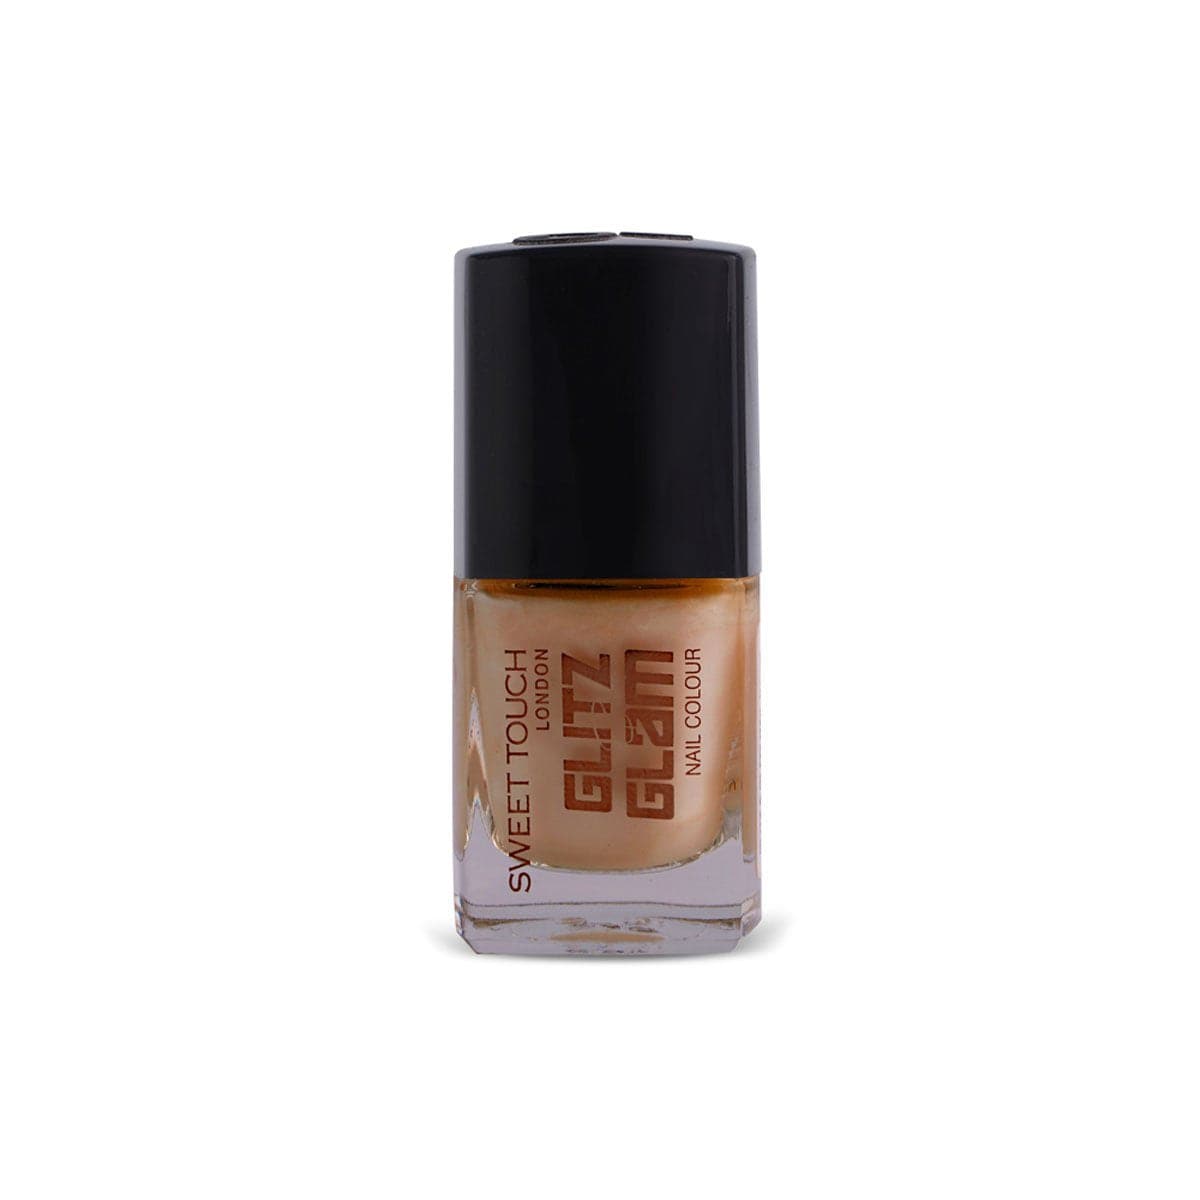 ST London Glitz & Glam Nail Paint - St254 Candy Floss - Premium Health & Beauty from St London - Just Rs 430.00! Shop now at Cozmetica